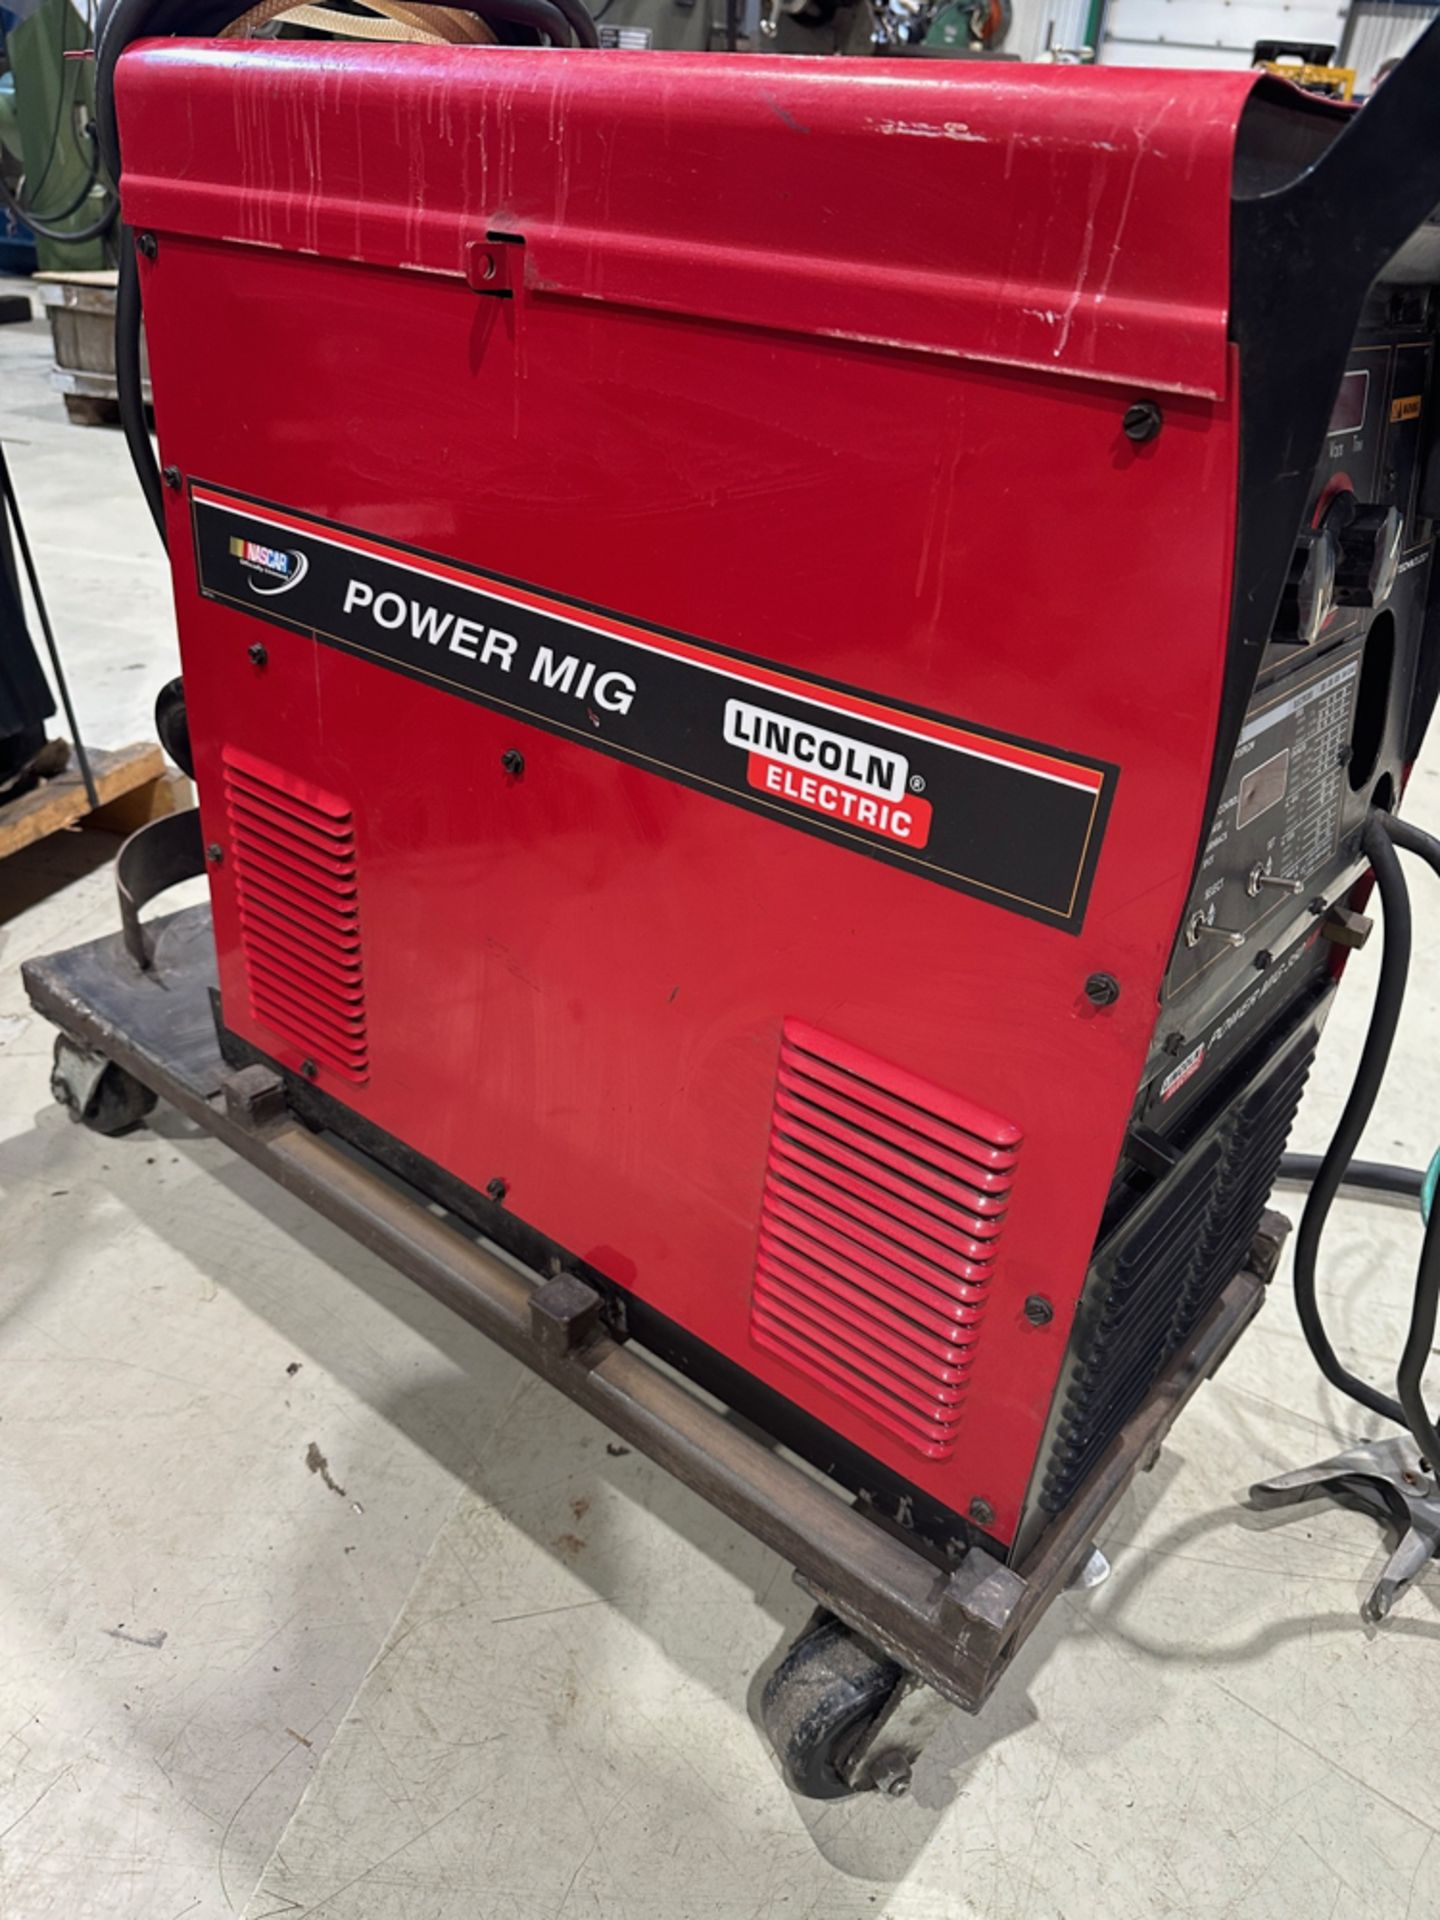 Lincoln Electric Welder, Model: Power MIG 350MP, SN: U1070306636, Cap: 350 Amps - Image 2 of 4